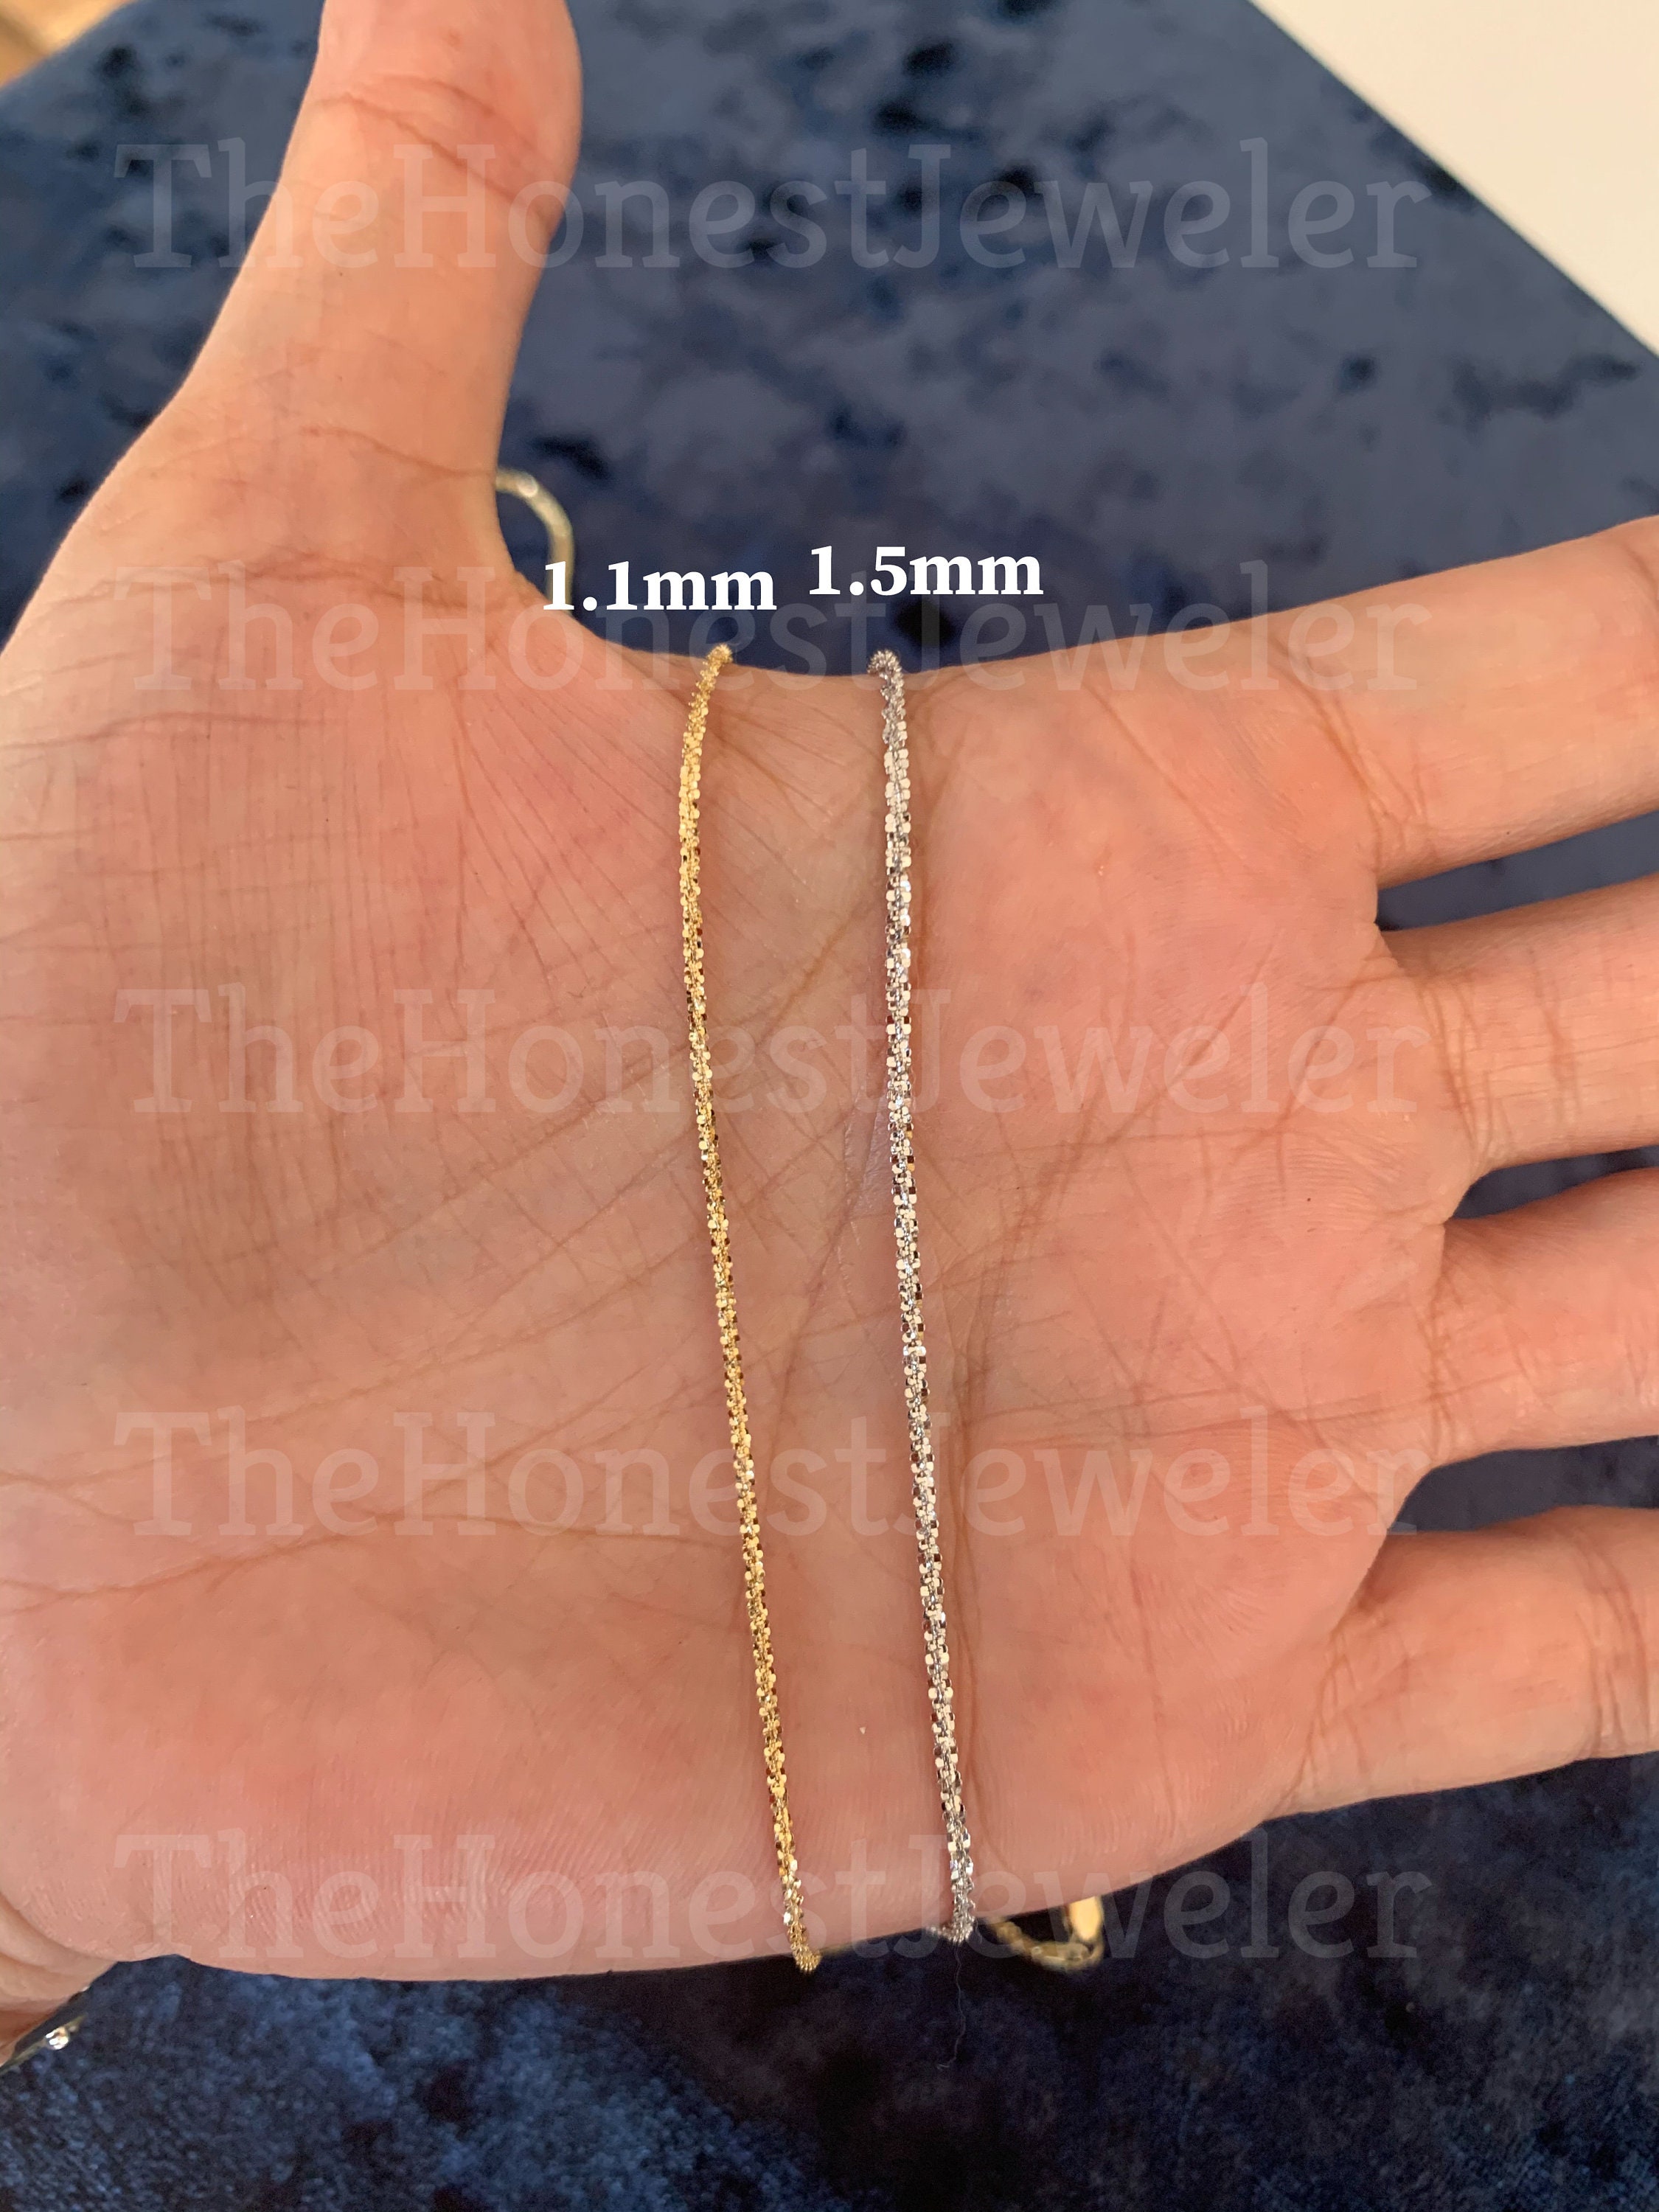 The Diamond Deal 14k SOLID Yellow or White Or Rose Gold 1.5mm Shiny Diamond  Cut PaperClip Link Chain Necklace for Pendants and Charms with L並行輸入品  レディースアクセサリー